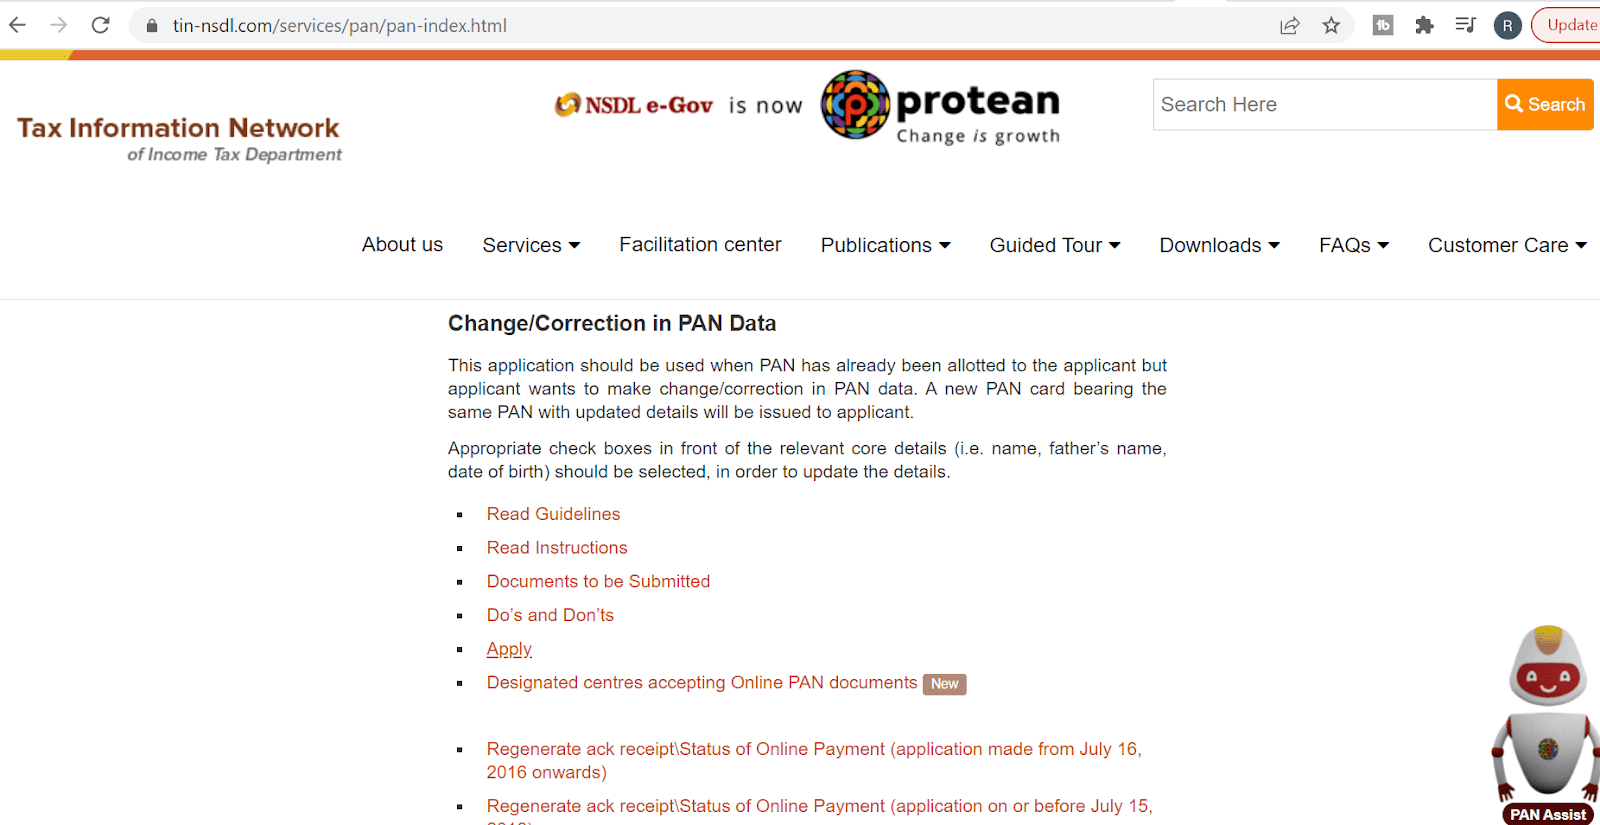 Navigate to the Change/Correction in PAN Data Section